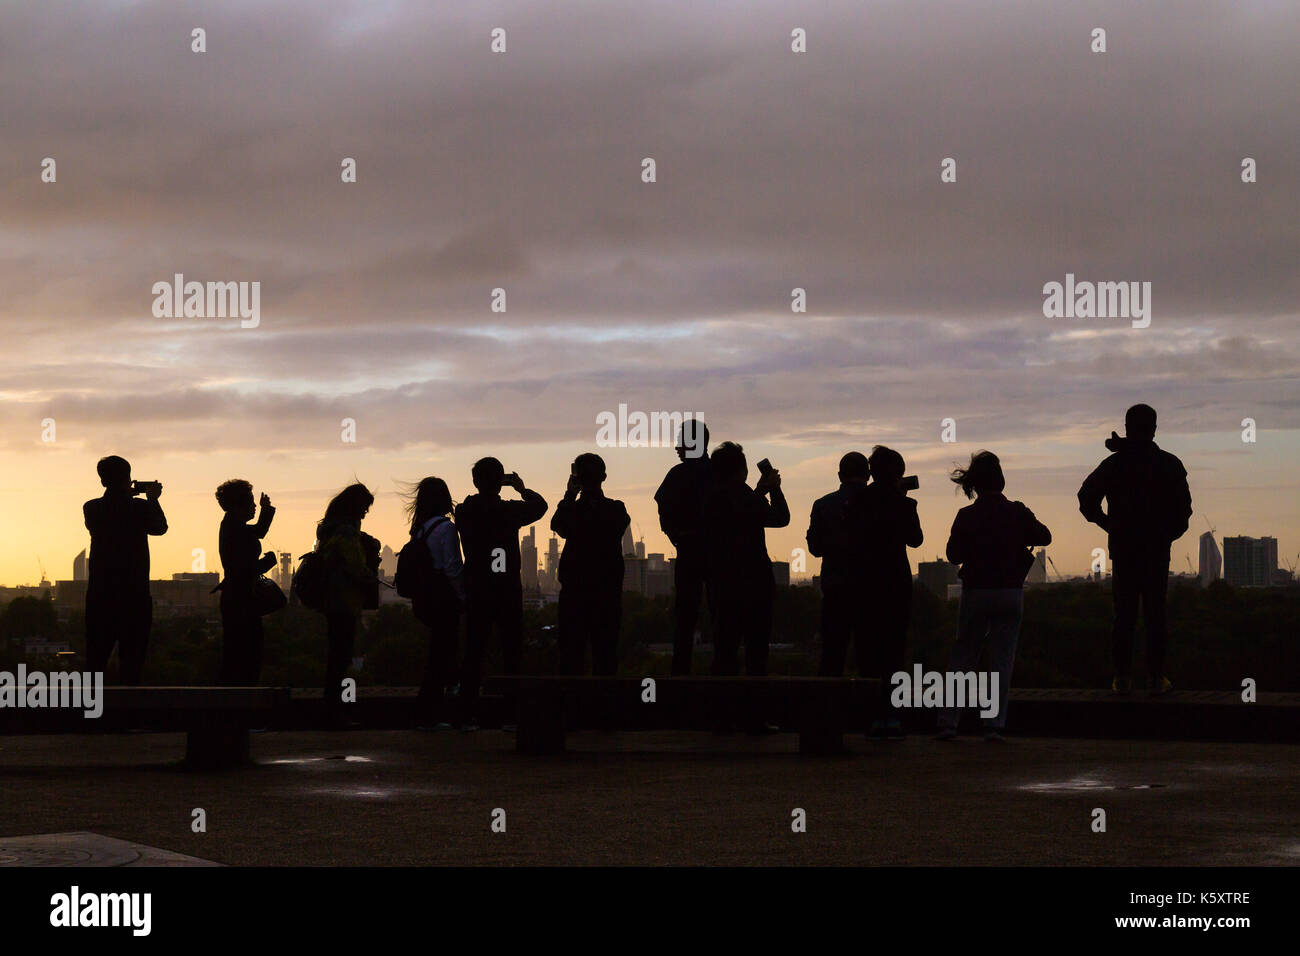 London, UK. 11th Sep, 2017. London, September 11 2017. A group of people admire the London skyline from the summit of Primrose Hill as a new day breaks over the city. Credit: Paul Davey/Alamy Live News Stock Photo